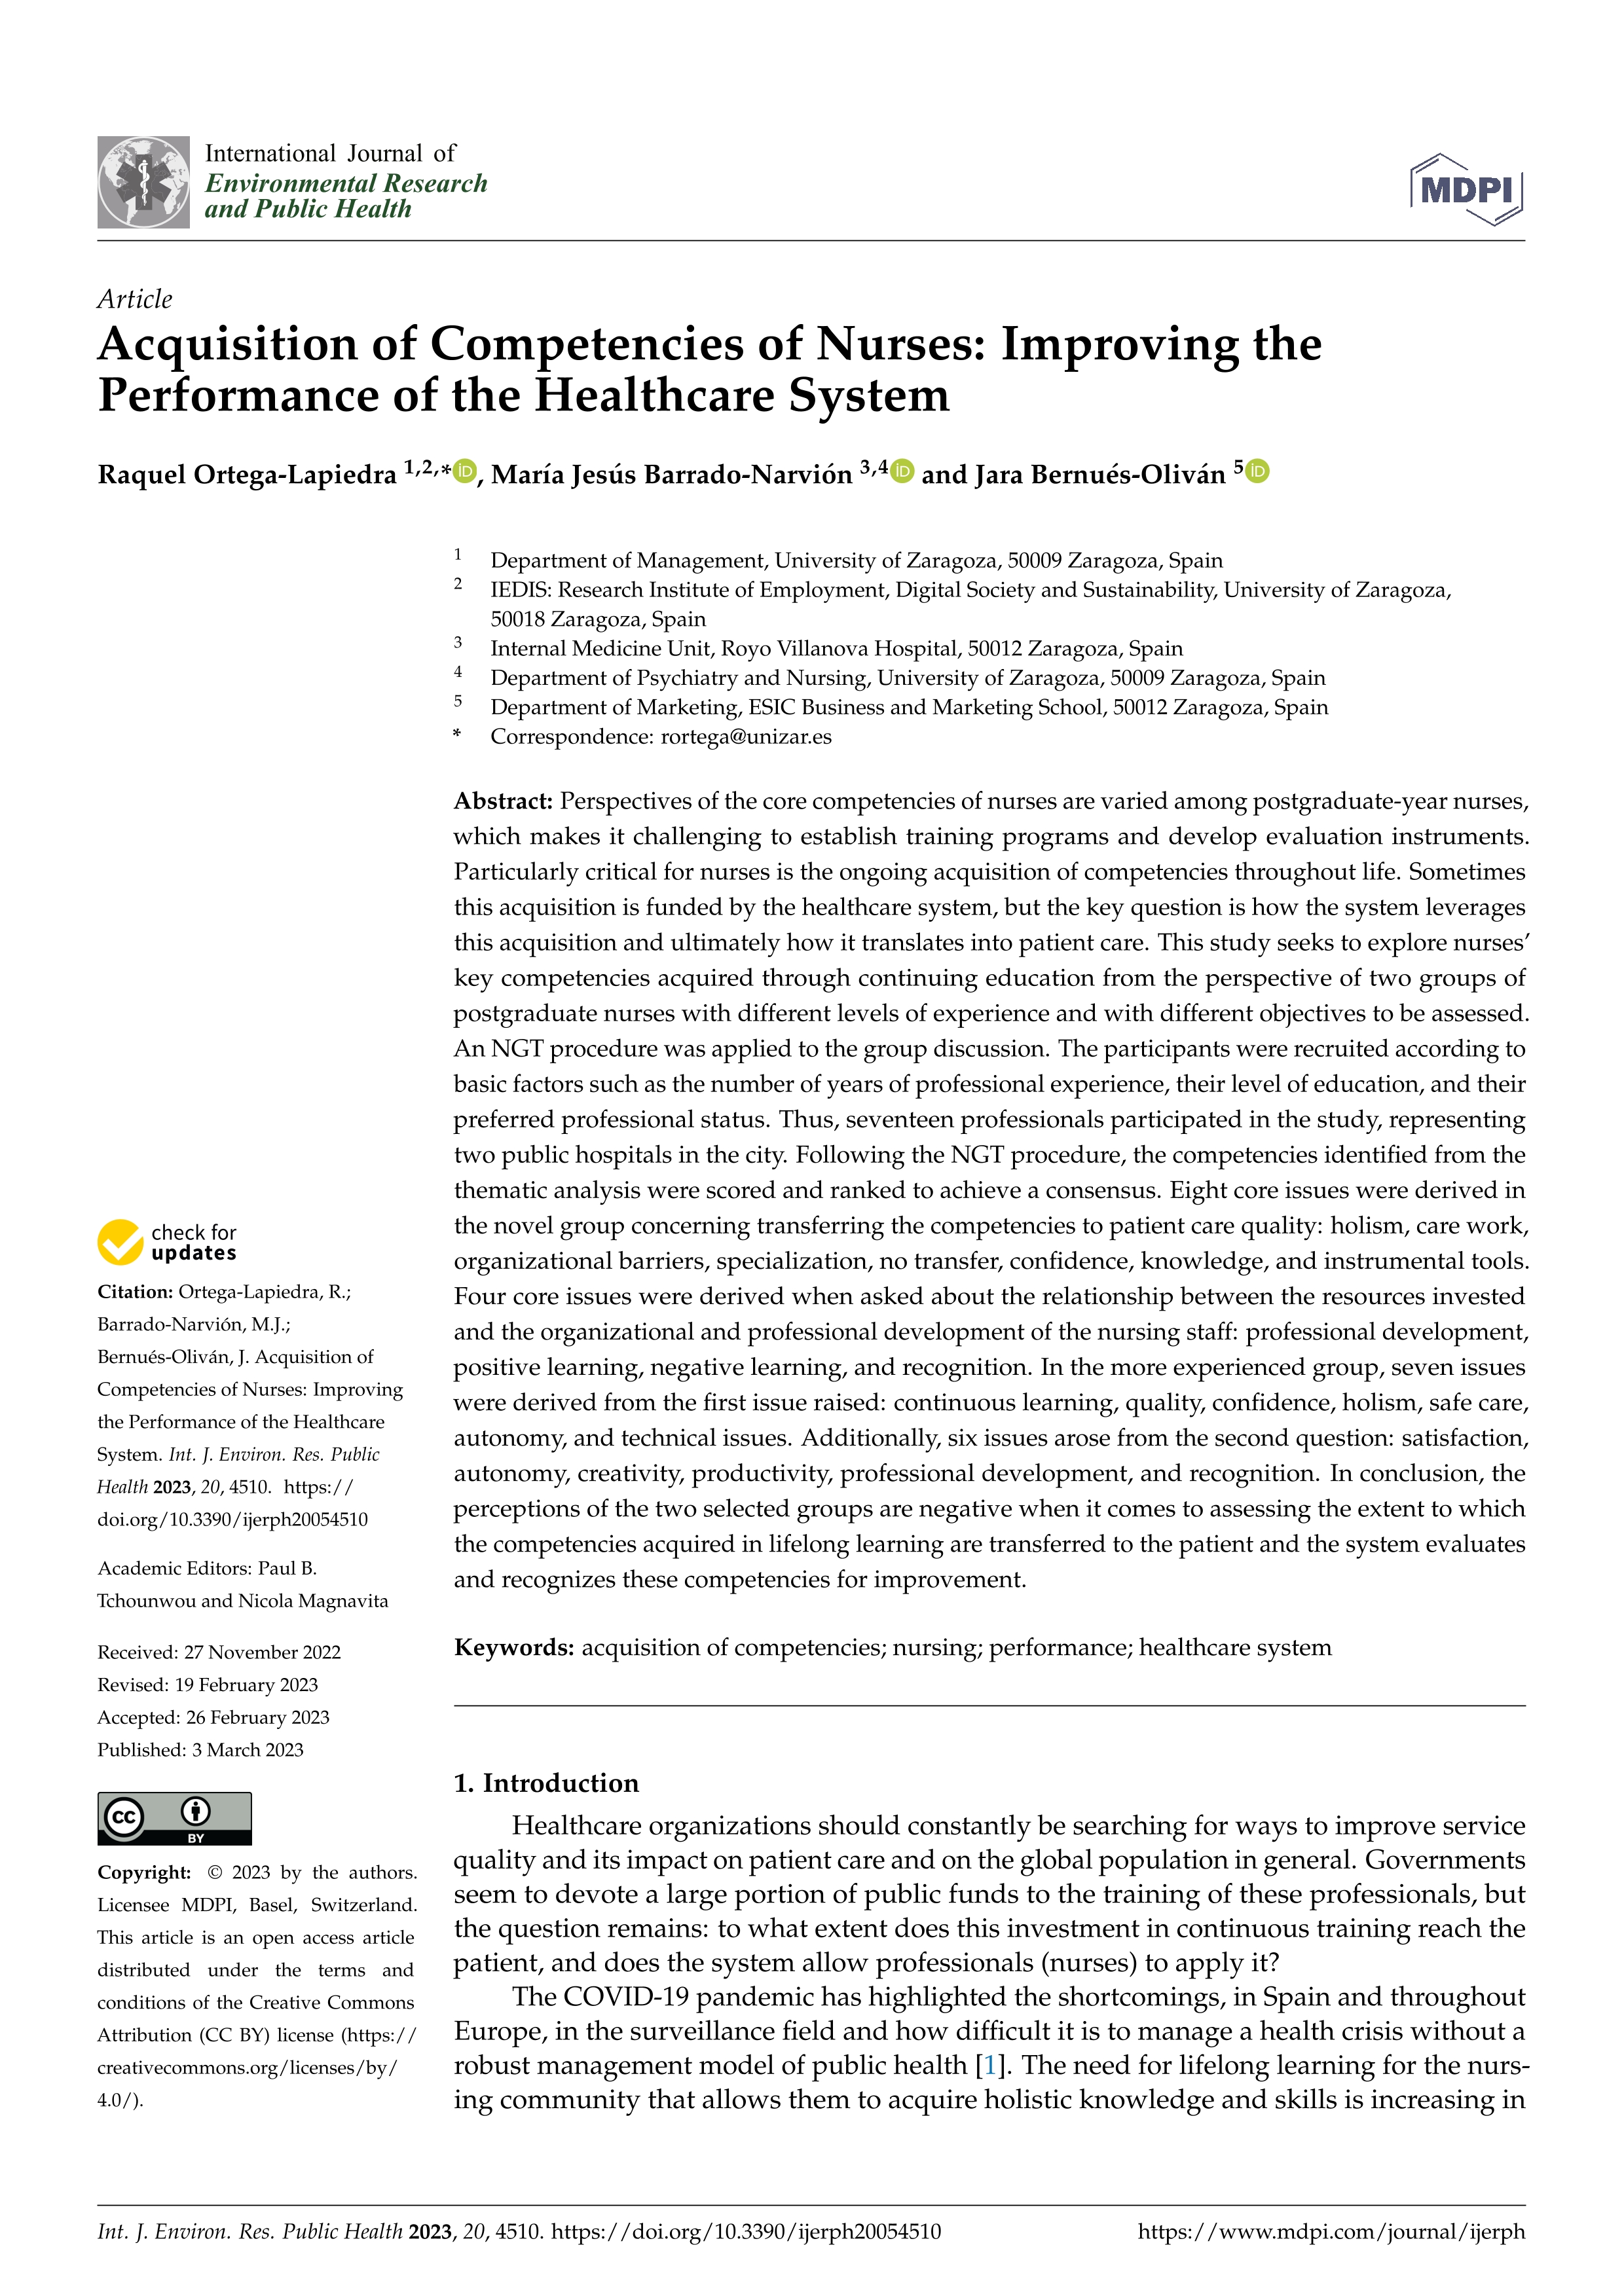 Acquisition of competencies of nurses: improving the performance of the healthcare system